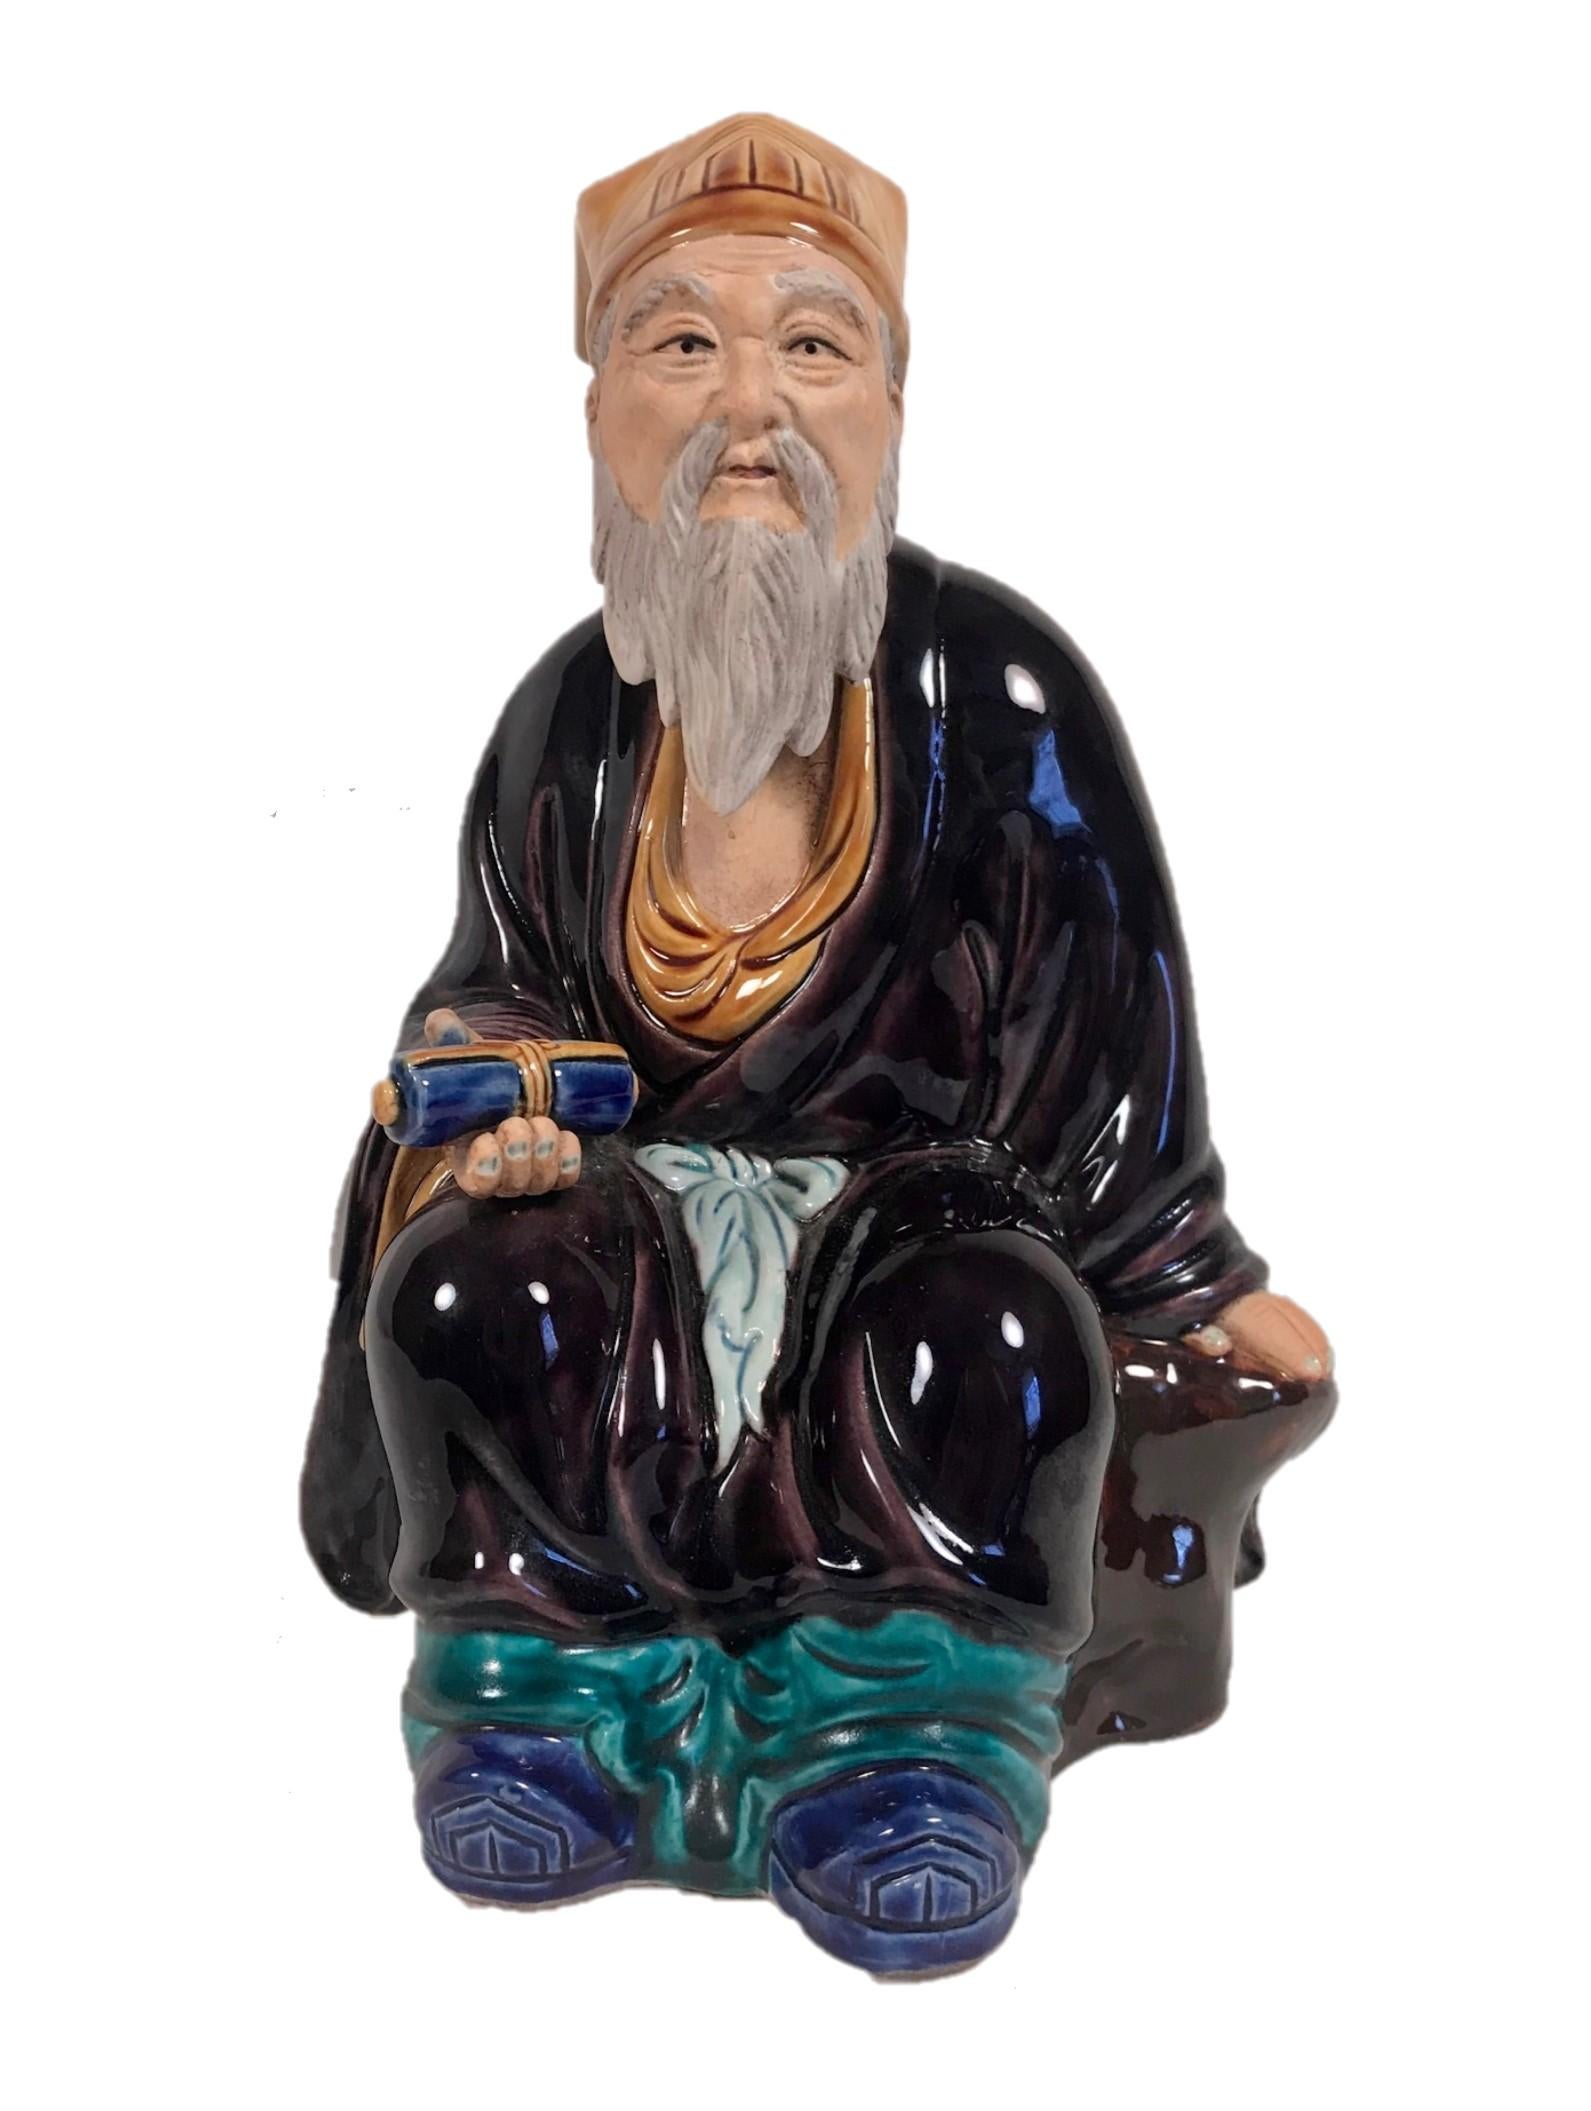 Vintage hand painted large 12” Chinese Mudman figure

This spectacular, high quality large mudman is for the advanced collector. It depicts a seated elder; a bearded scholar holding a scroll in his hand. He is dressed in a robe and wearing a